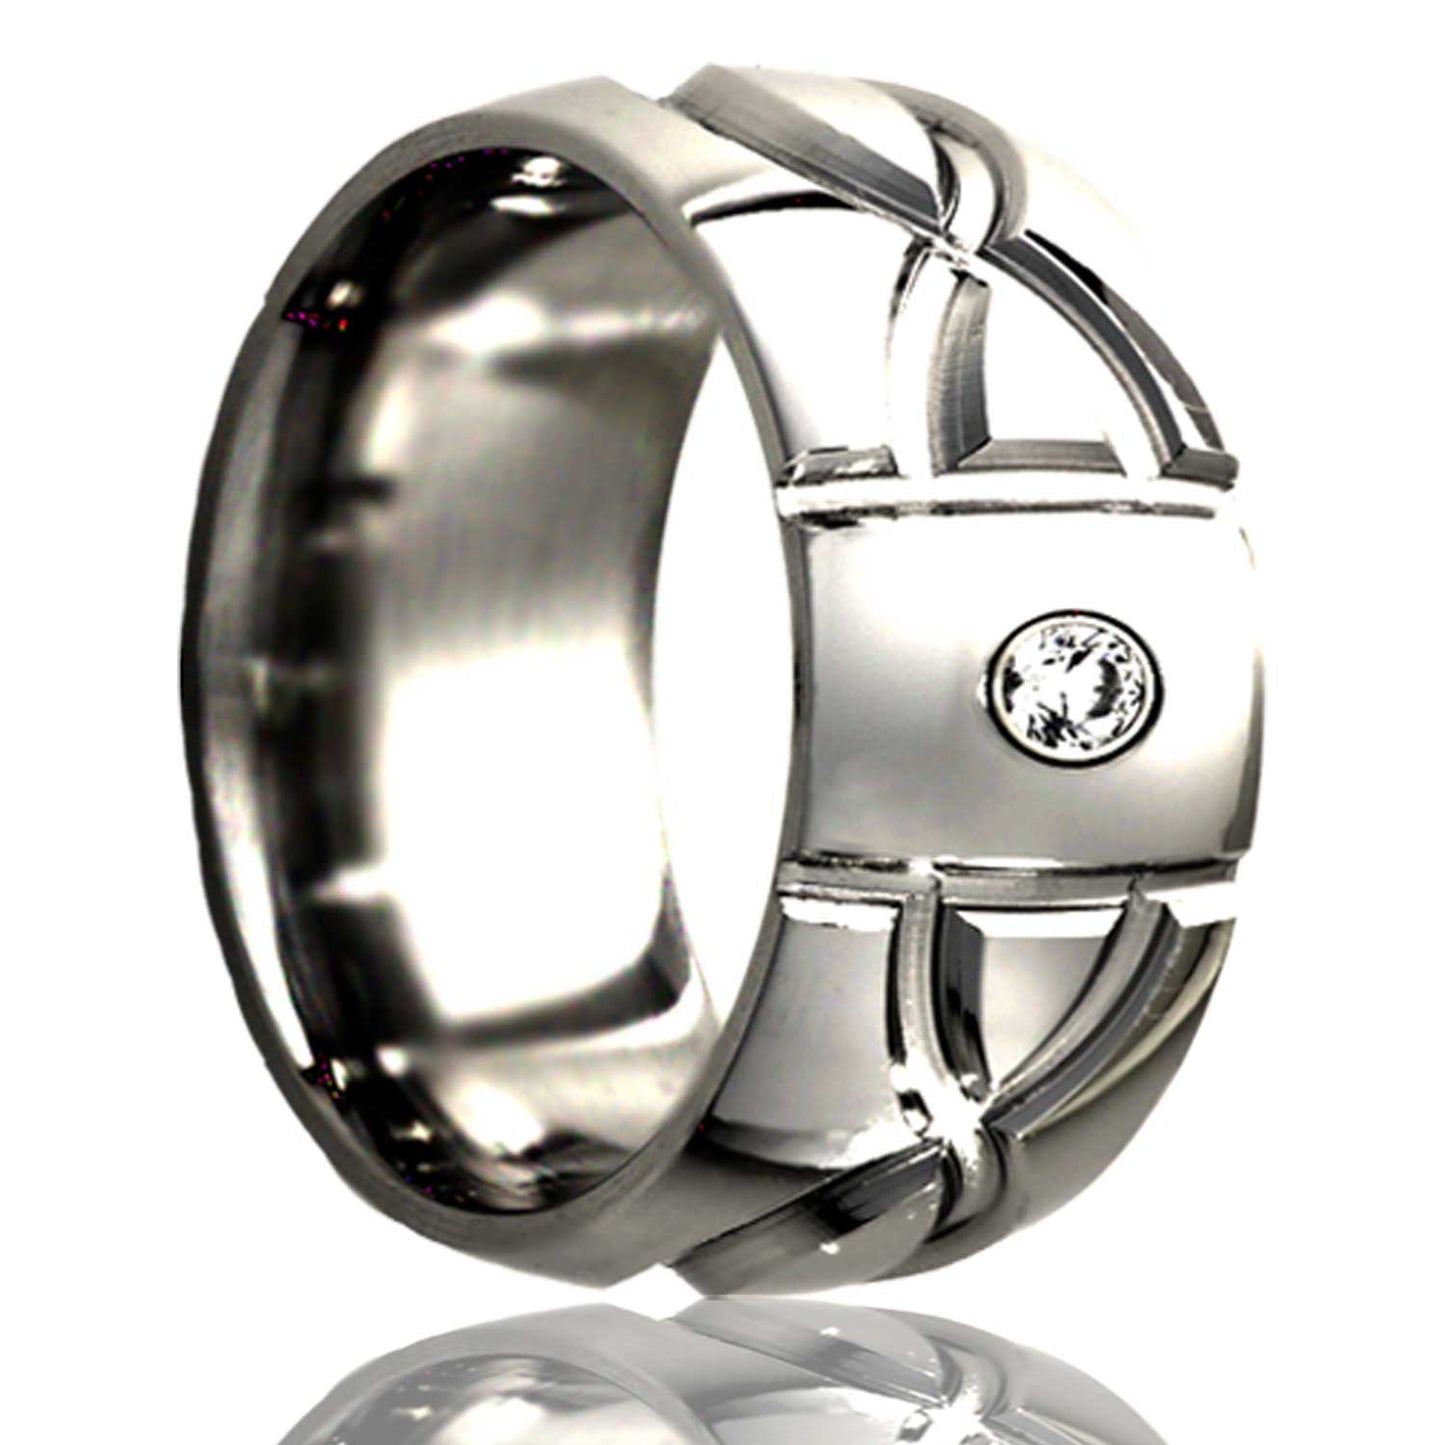 A infinity waves domed titanium men's wedding band with diamond displayed on a neutral white background.